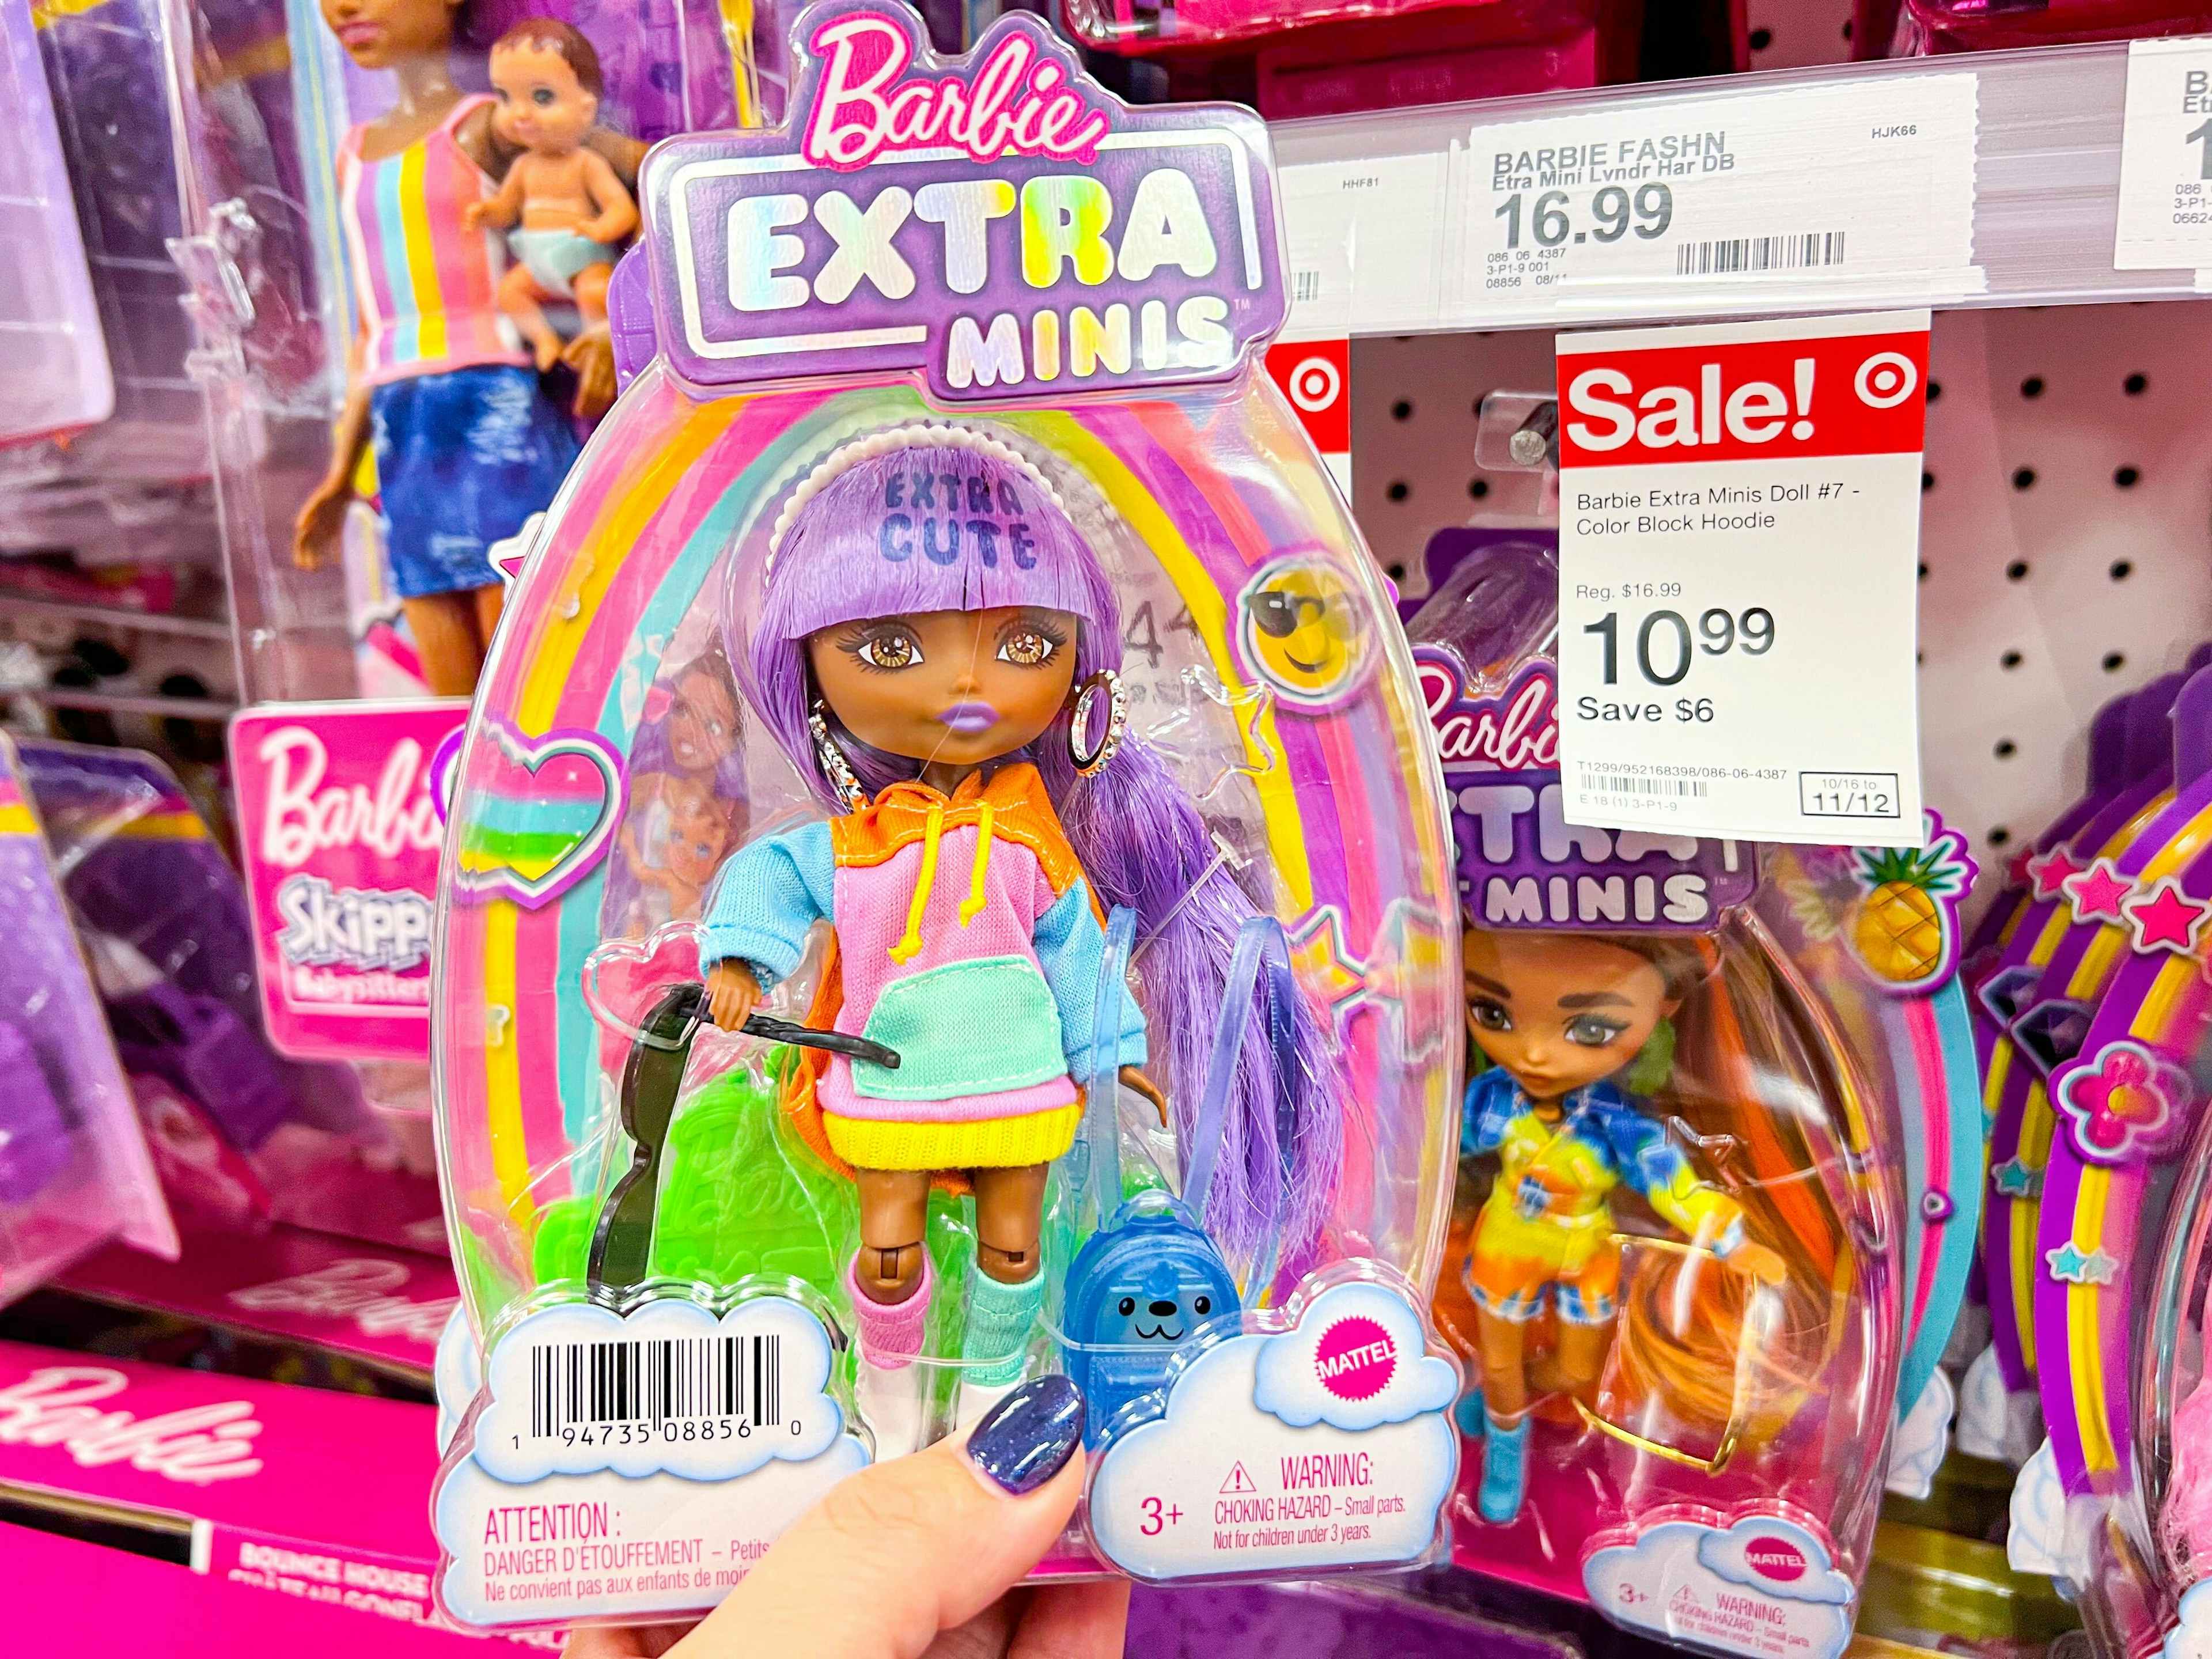 barbie extra mini dolls on sale for $10.99 at Target